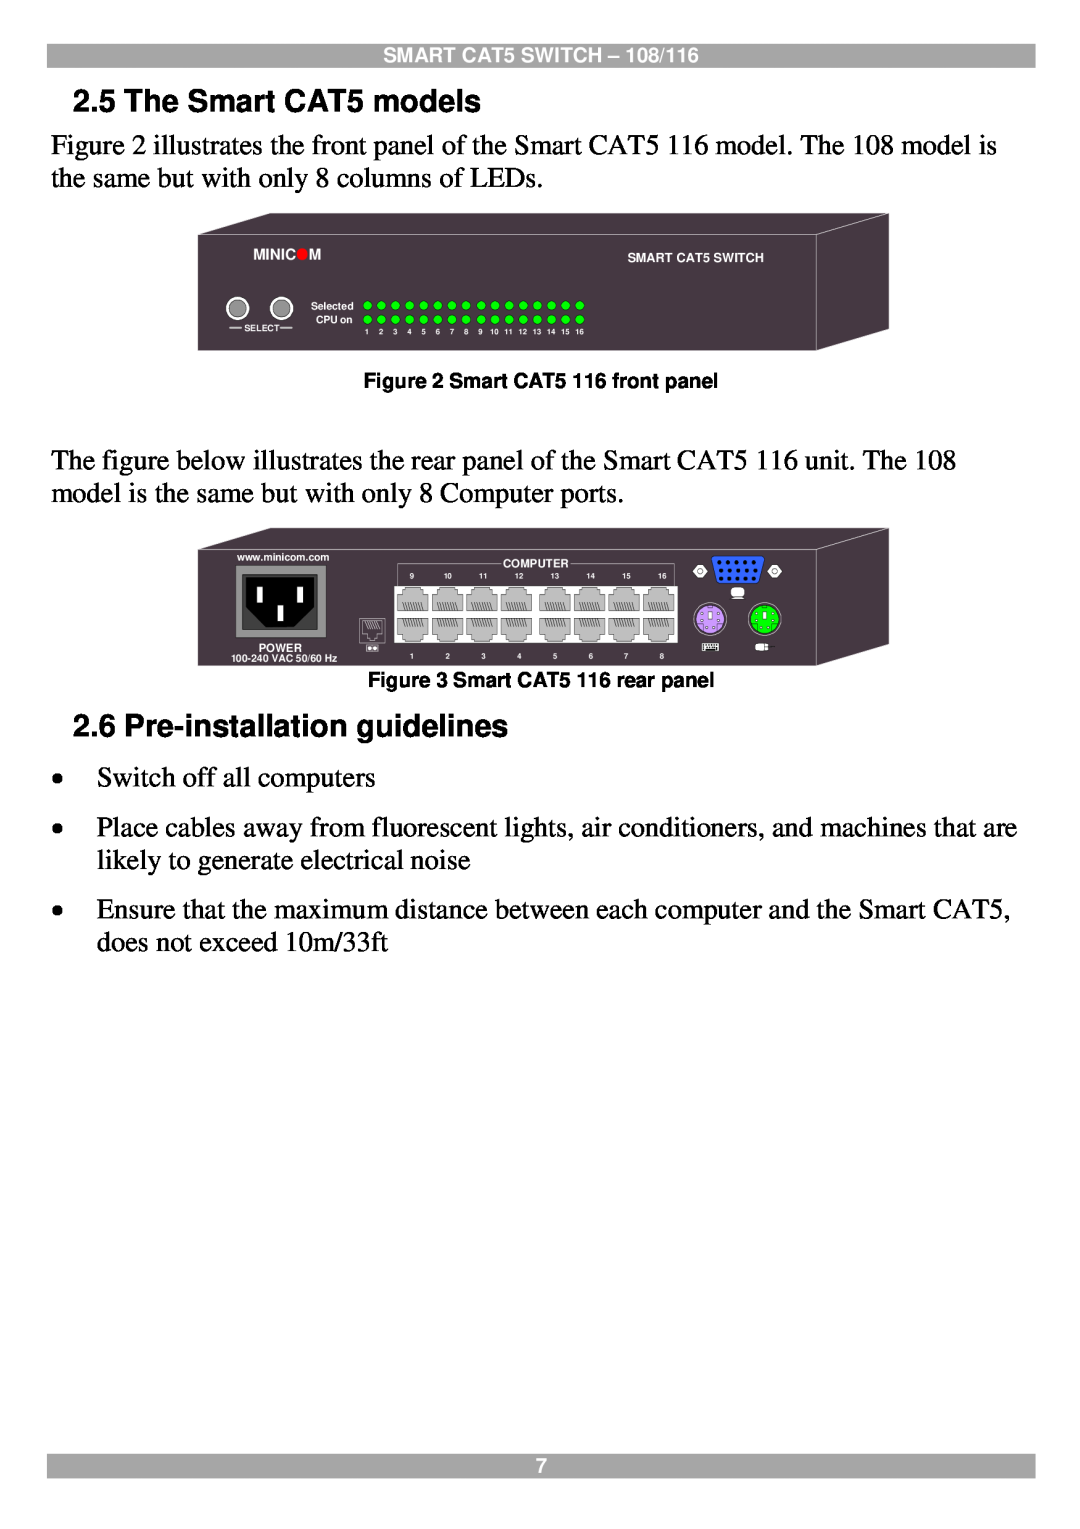 Tripp Lite 108, 116 manual The Smart CAT5 models, Pre-installation guidelines 